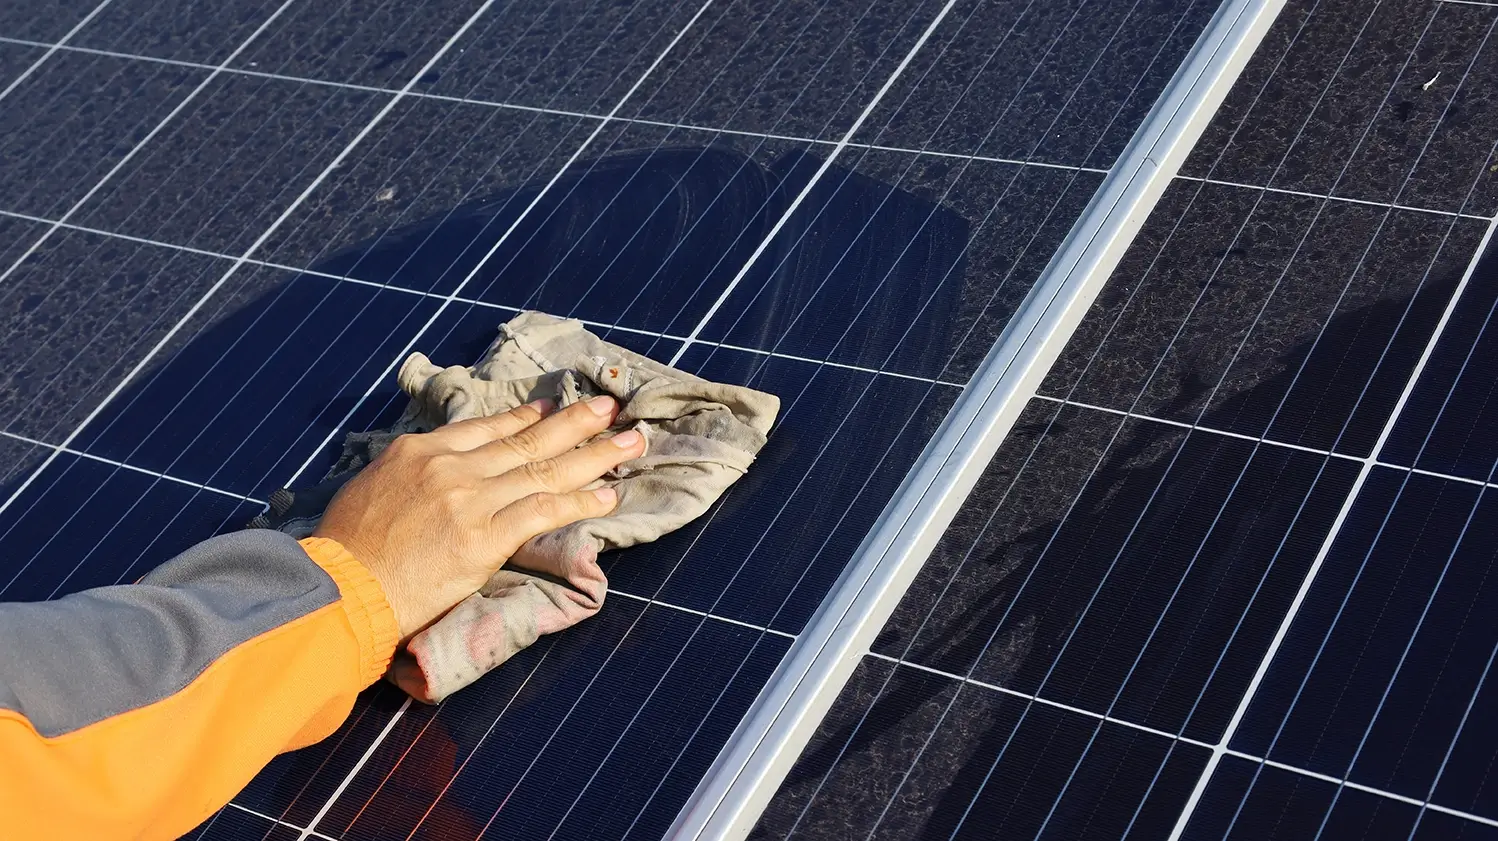 Hand cleaning solar panels with towel